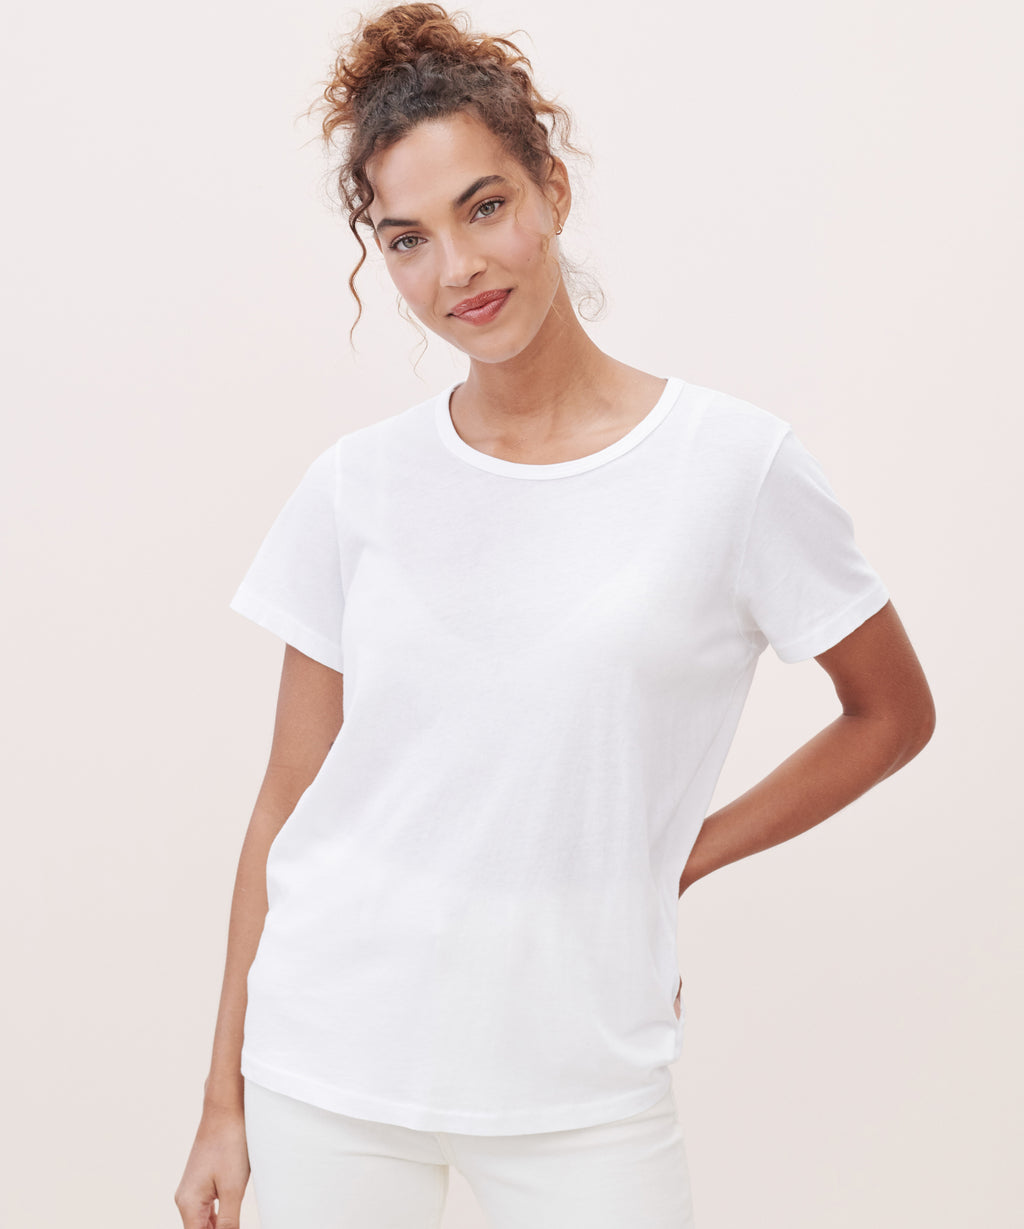 Shop latest trending '47 Brand White Wash color T-Shirts & Tops